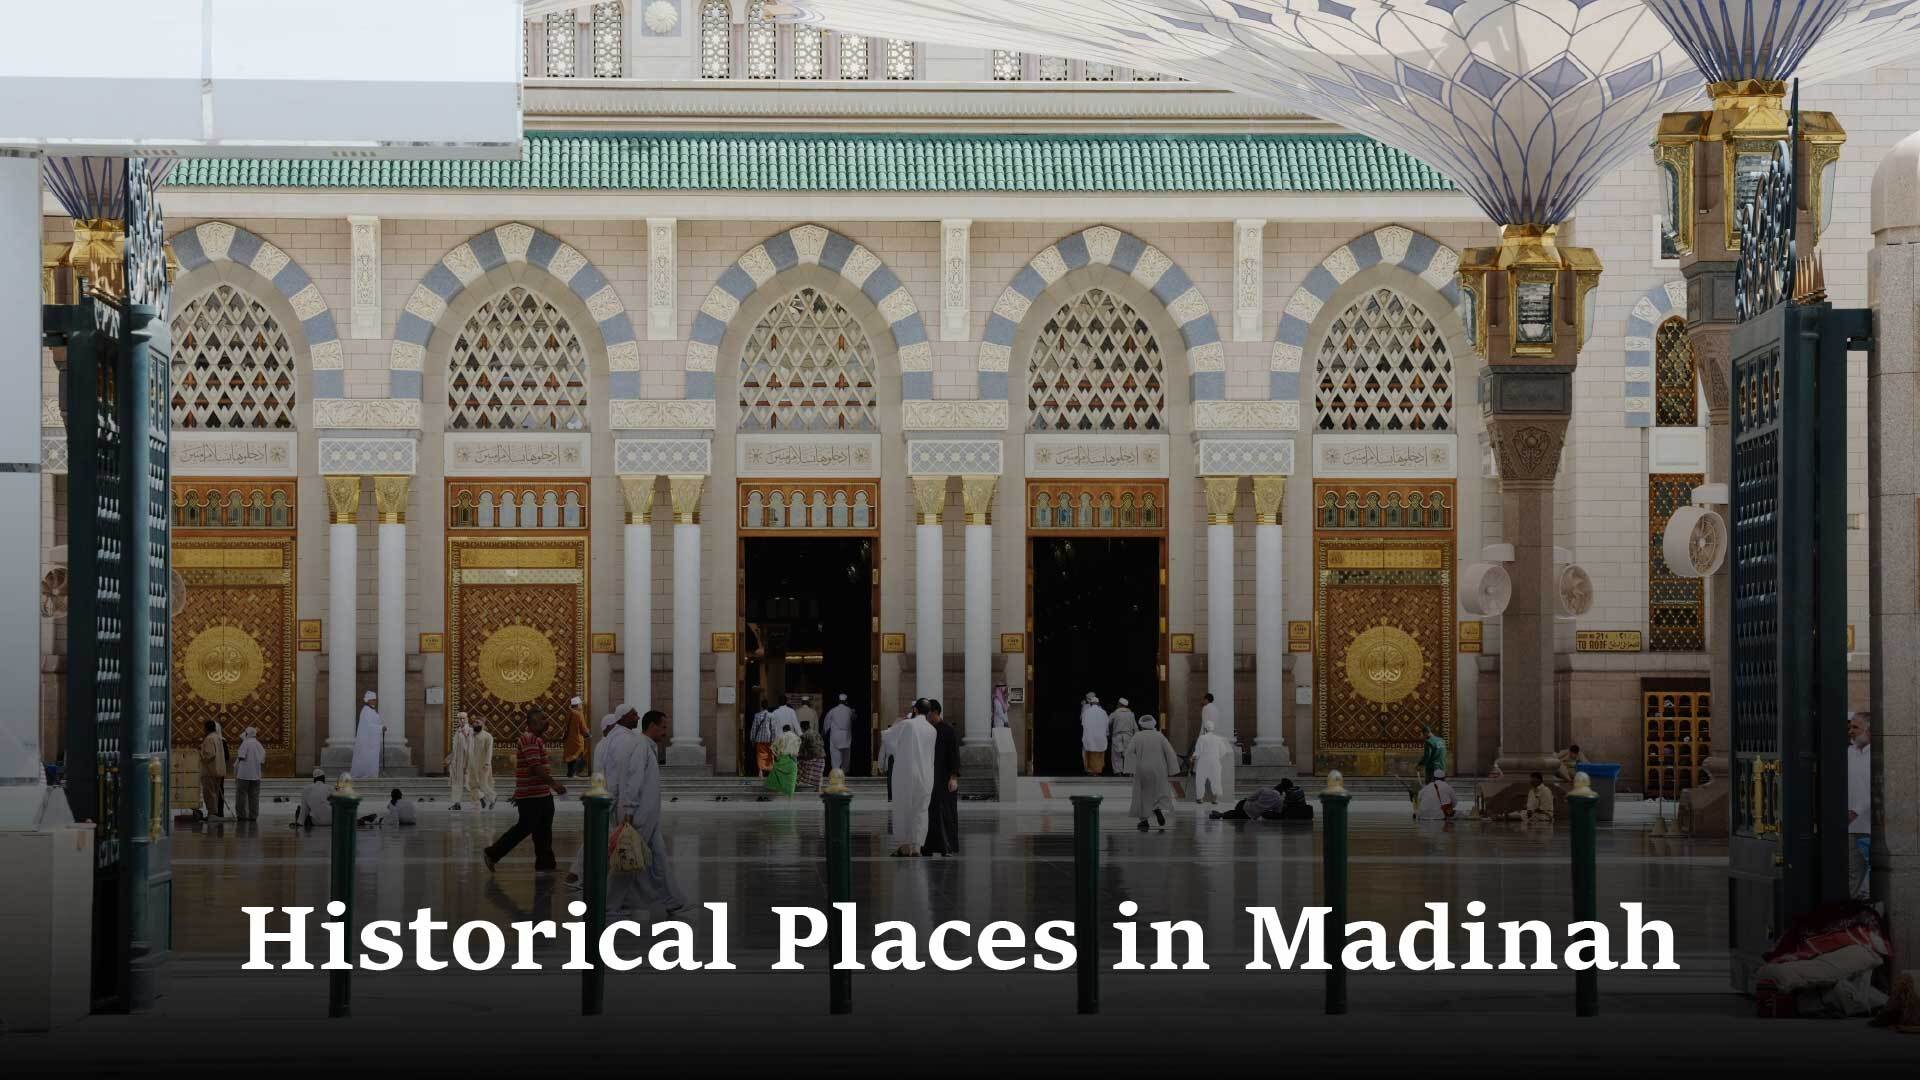 Historical Islamic Sites in Madinah